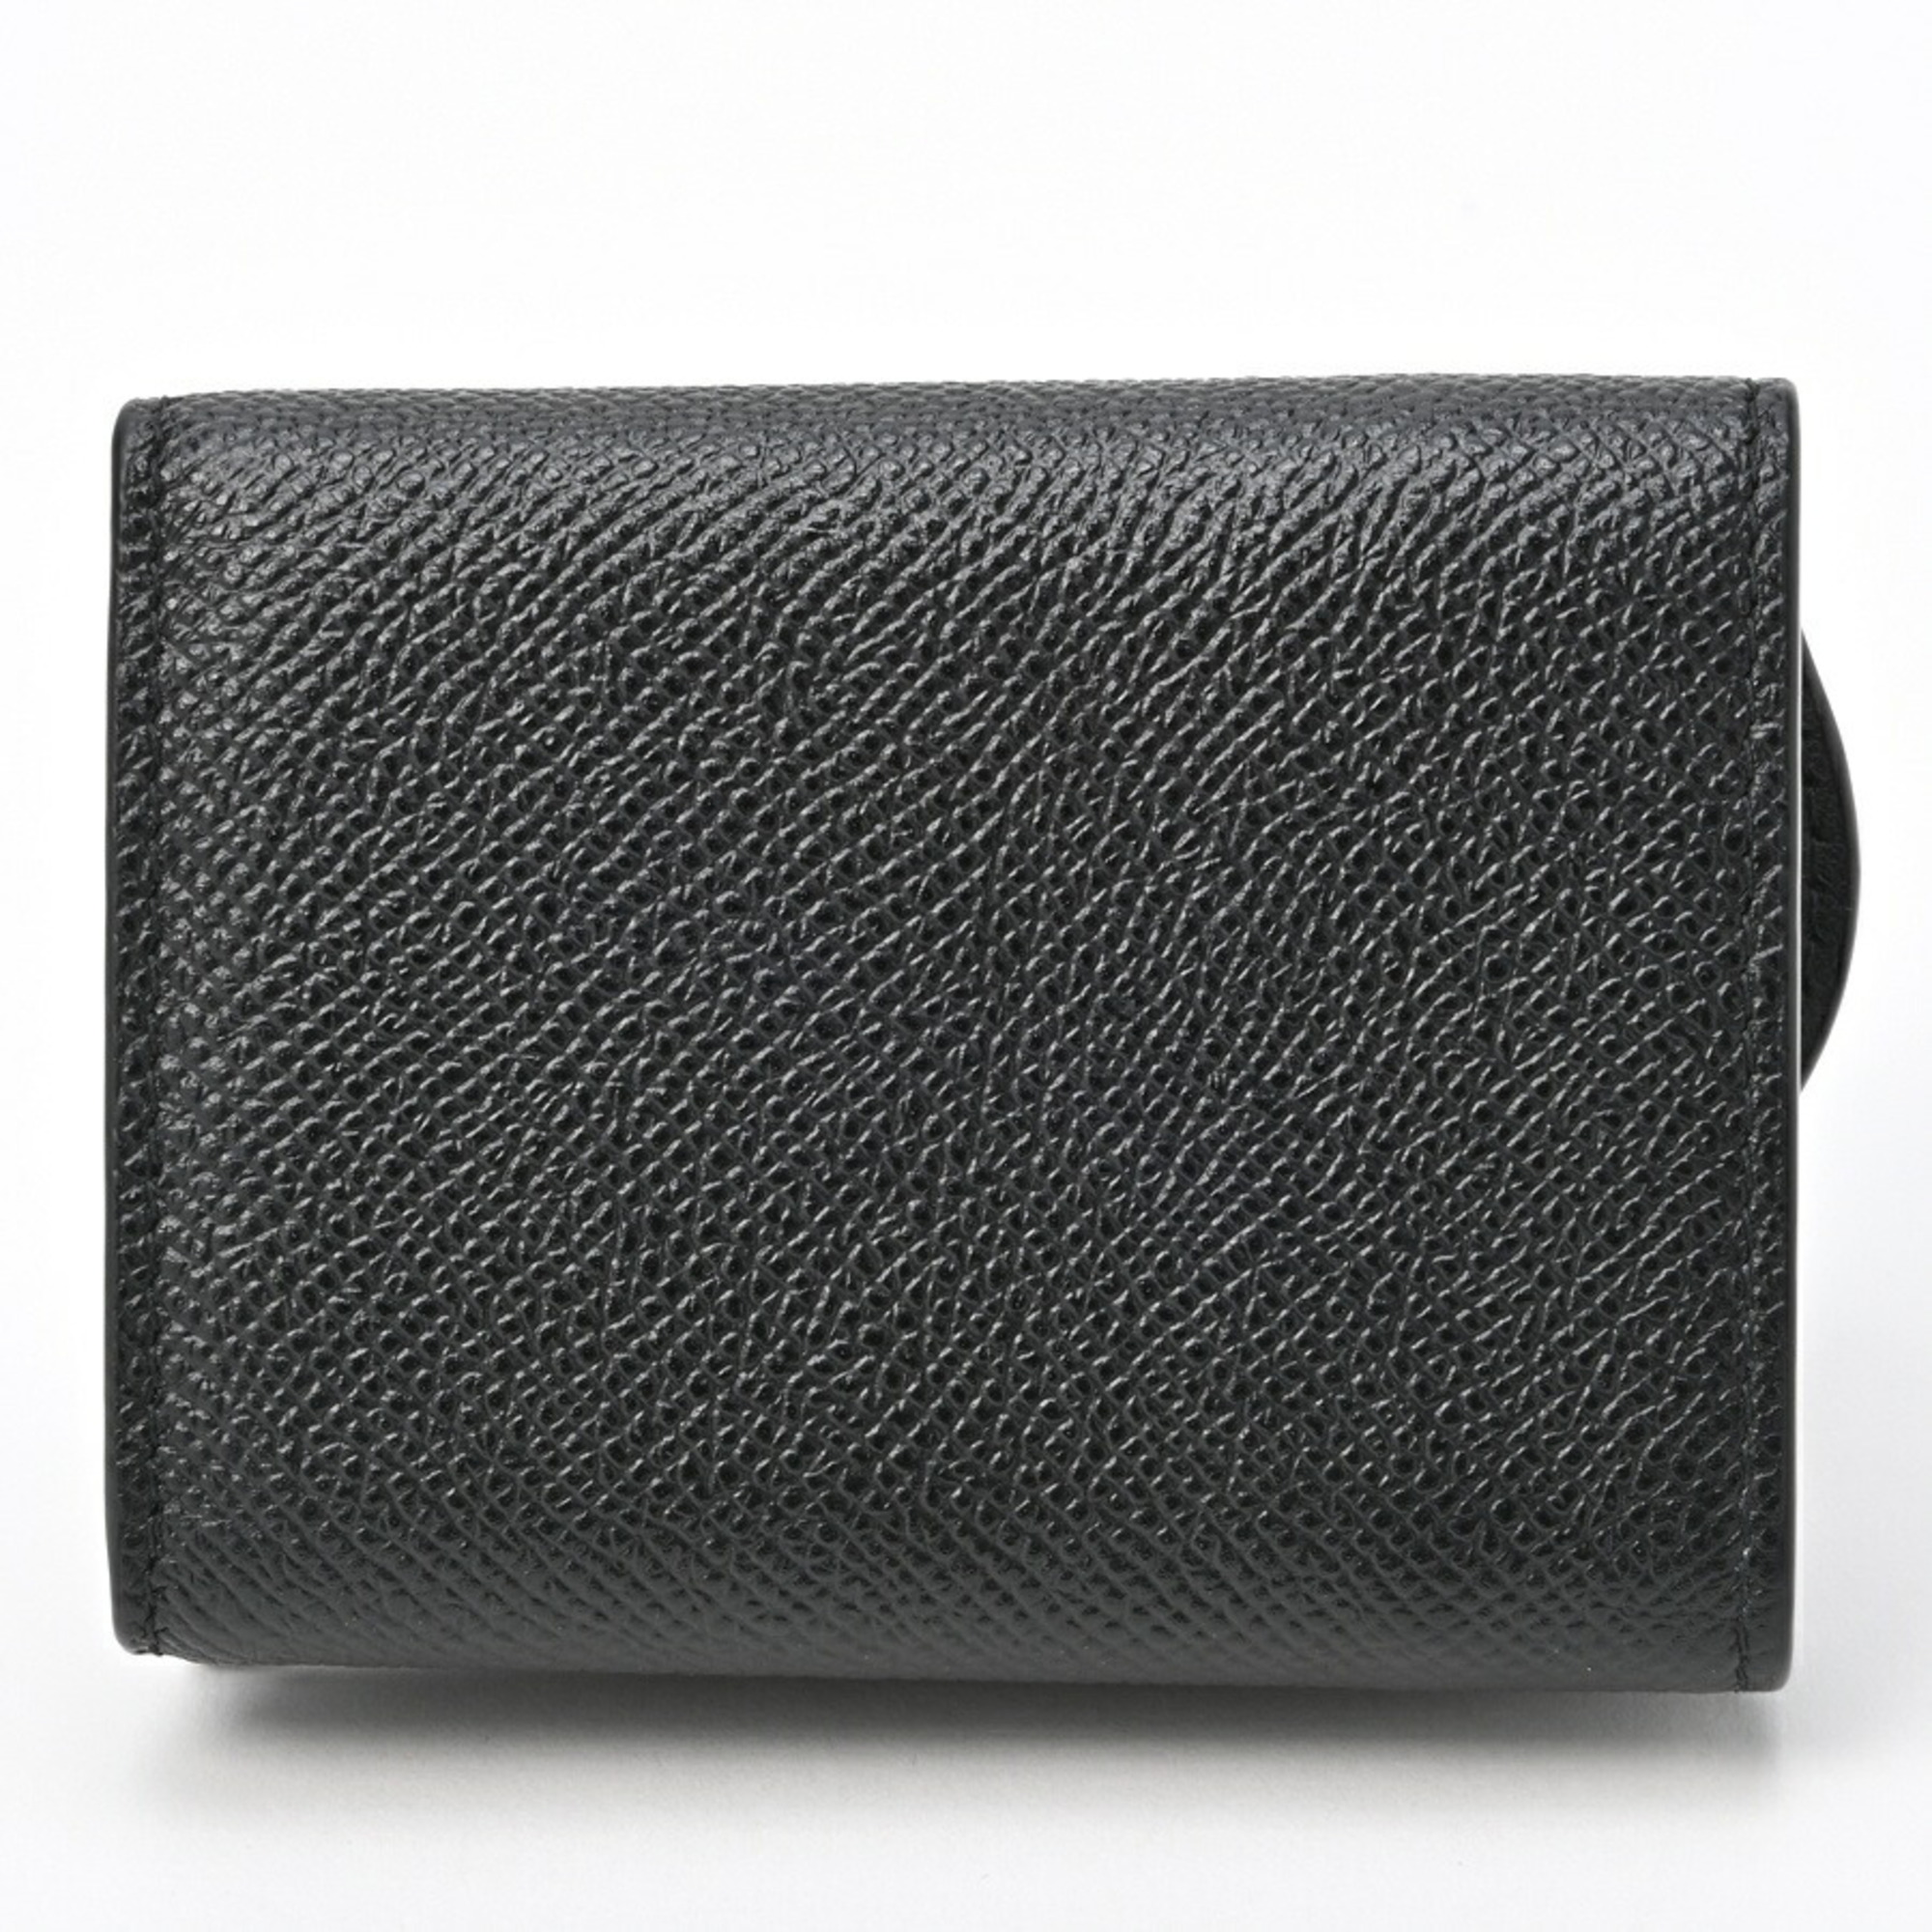 Christian Dior Dior Saddle Compact Wallet Trifold S5653CBAA Grained Calfskin S-155072